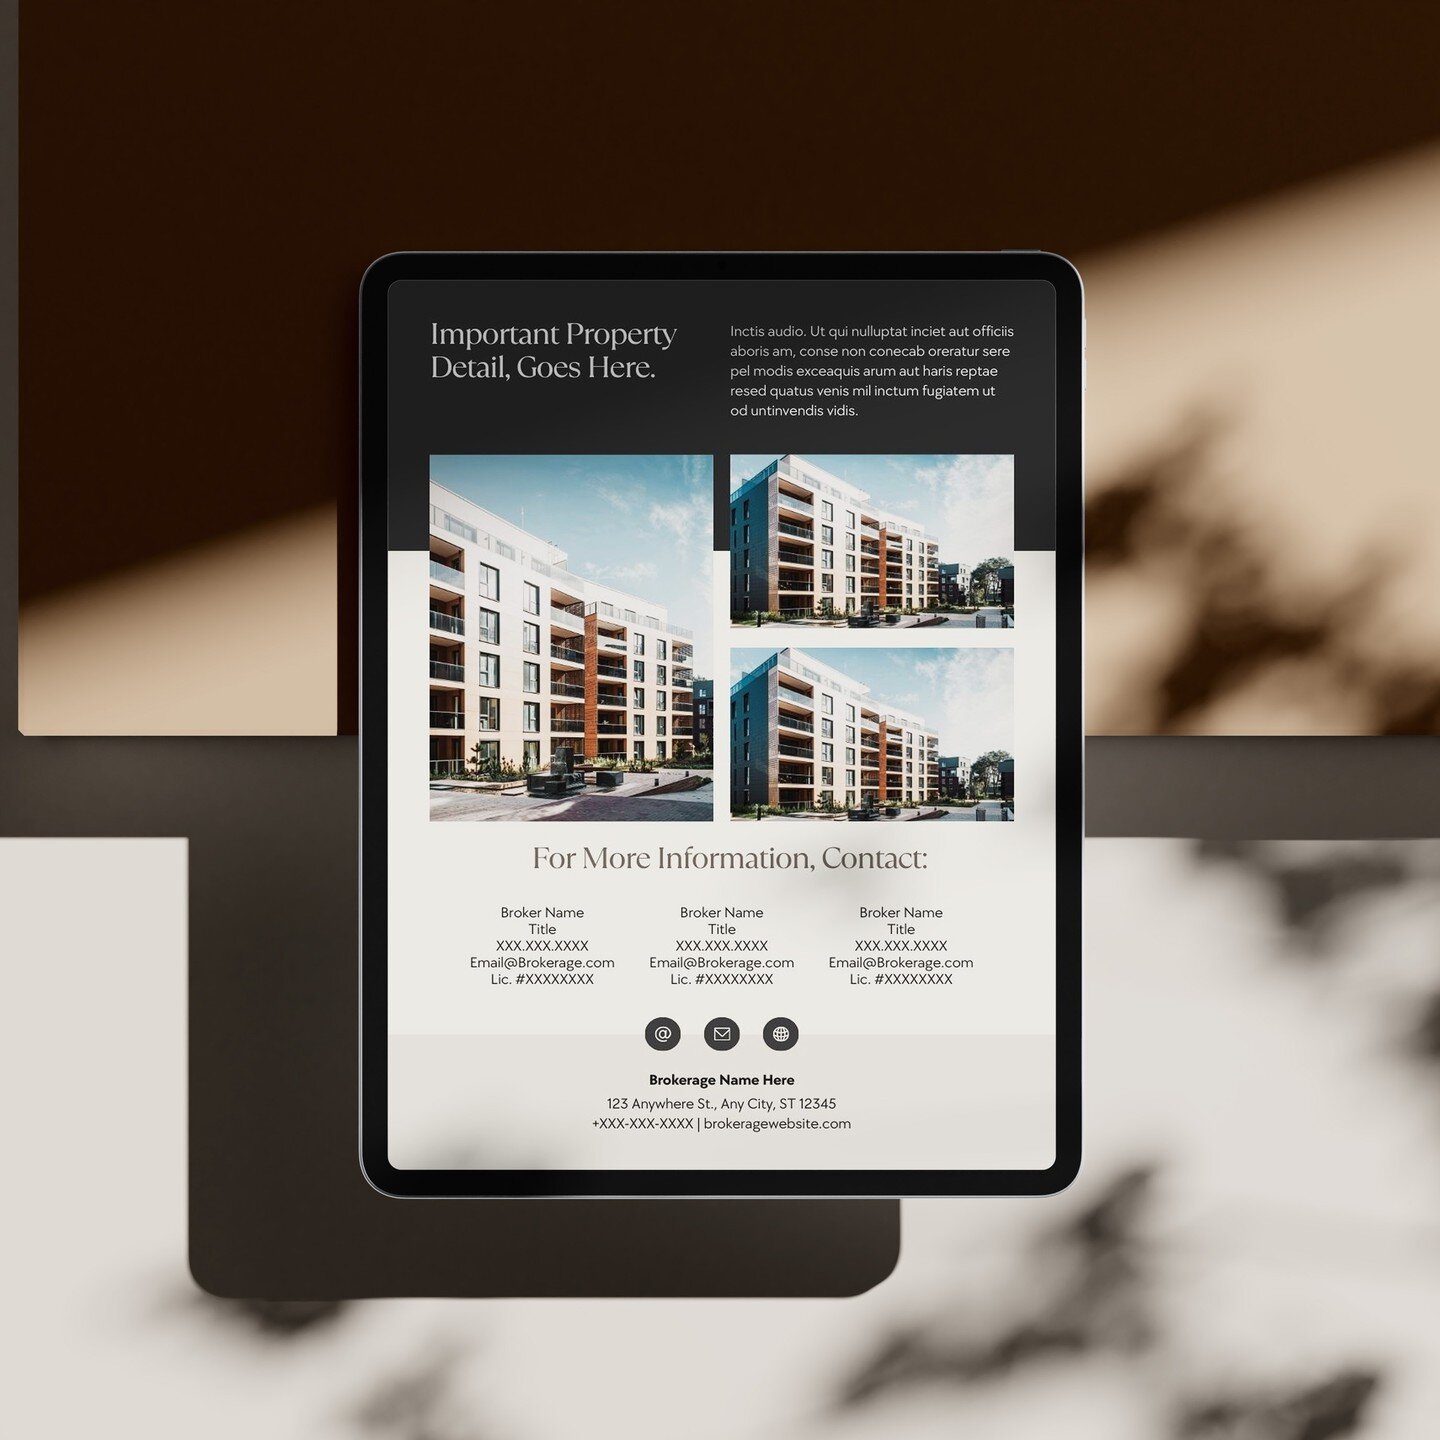 Stand out from the crowd and sell faster with our premium commercial real estate templates - fully customizable in Canva.

#commercialrealestate #commercialrealestatebroker #commercialrealestatemarketing